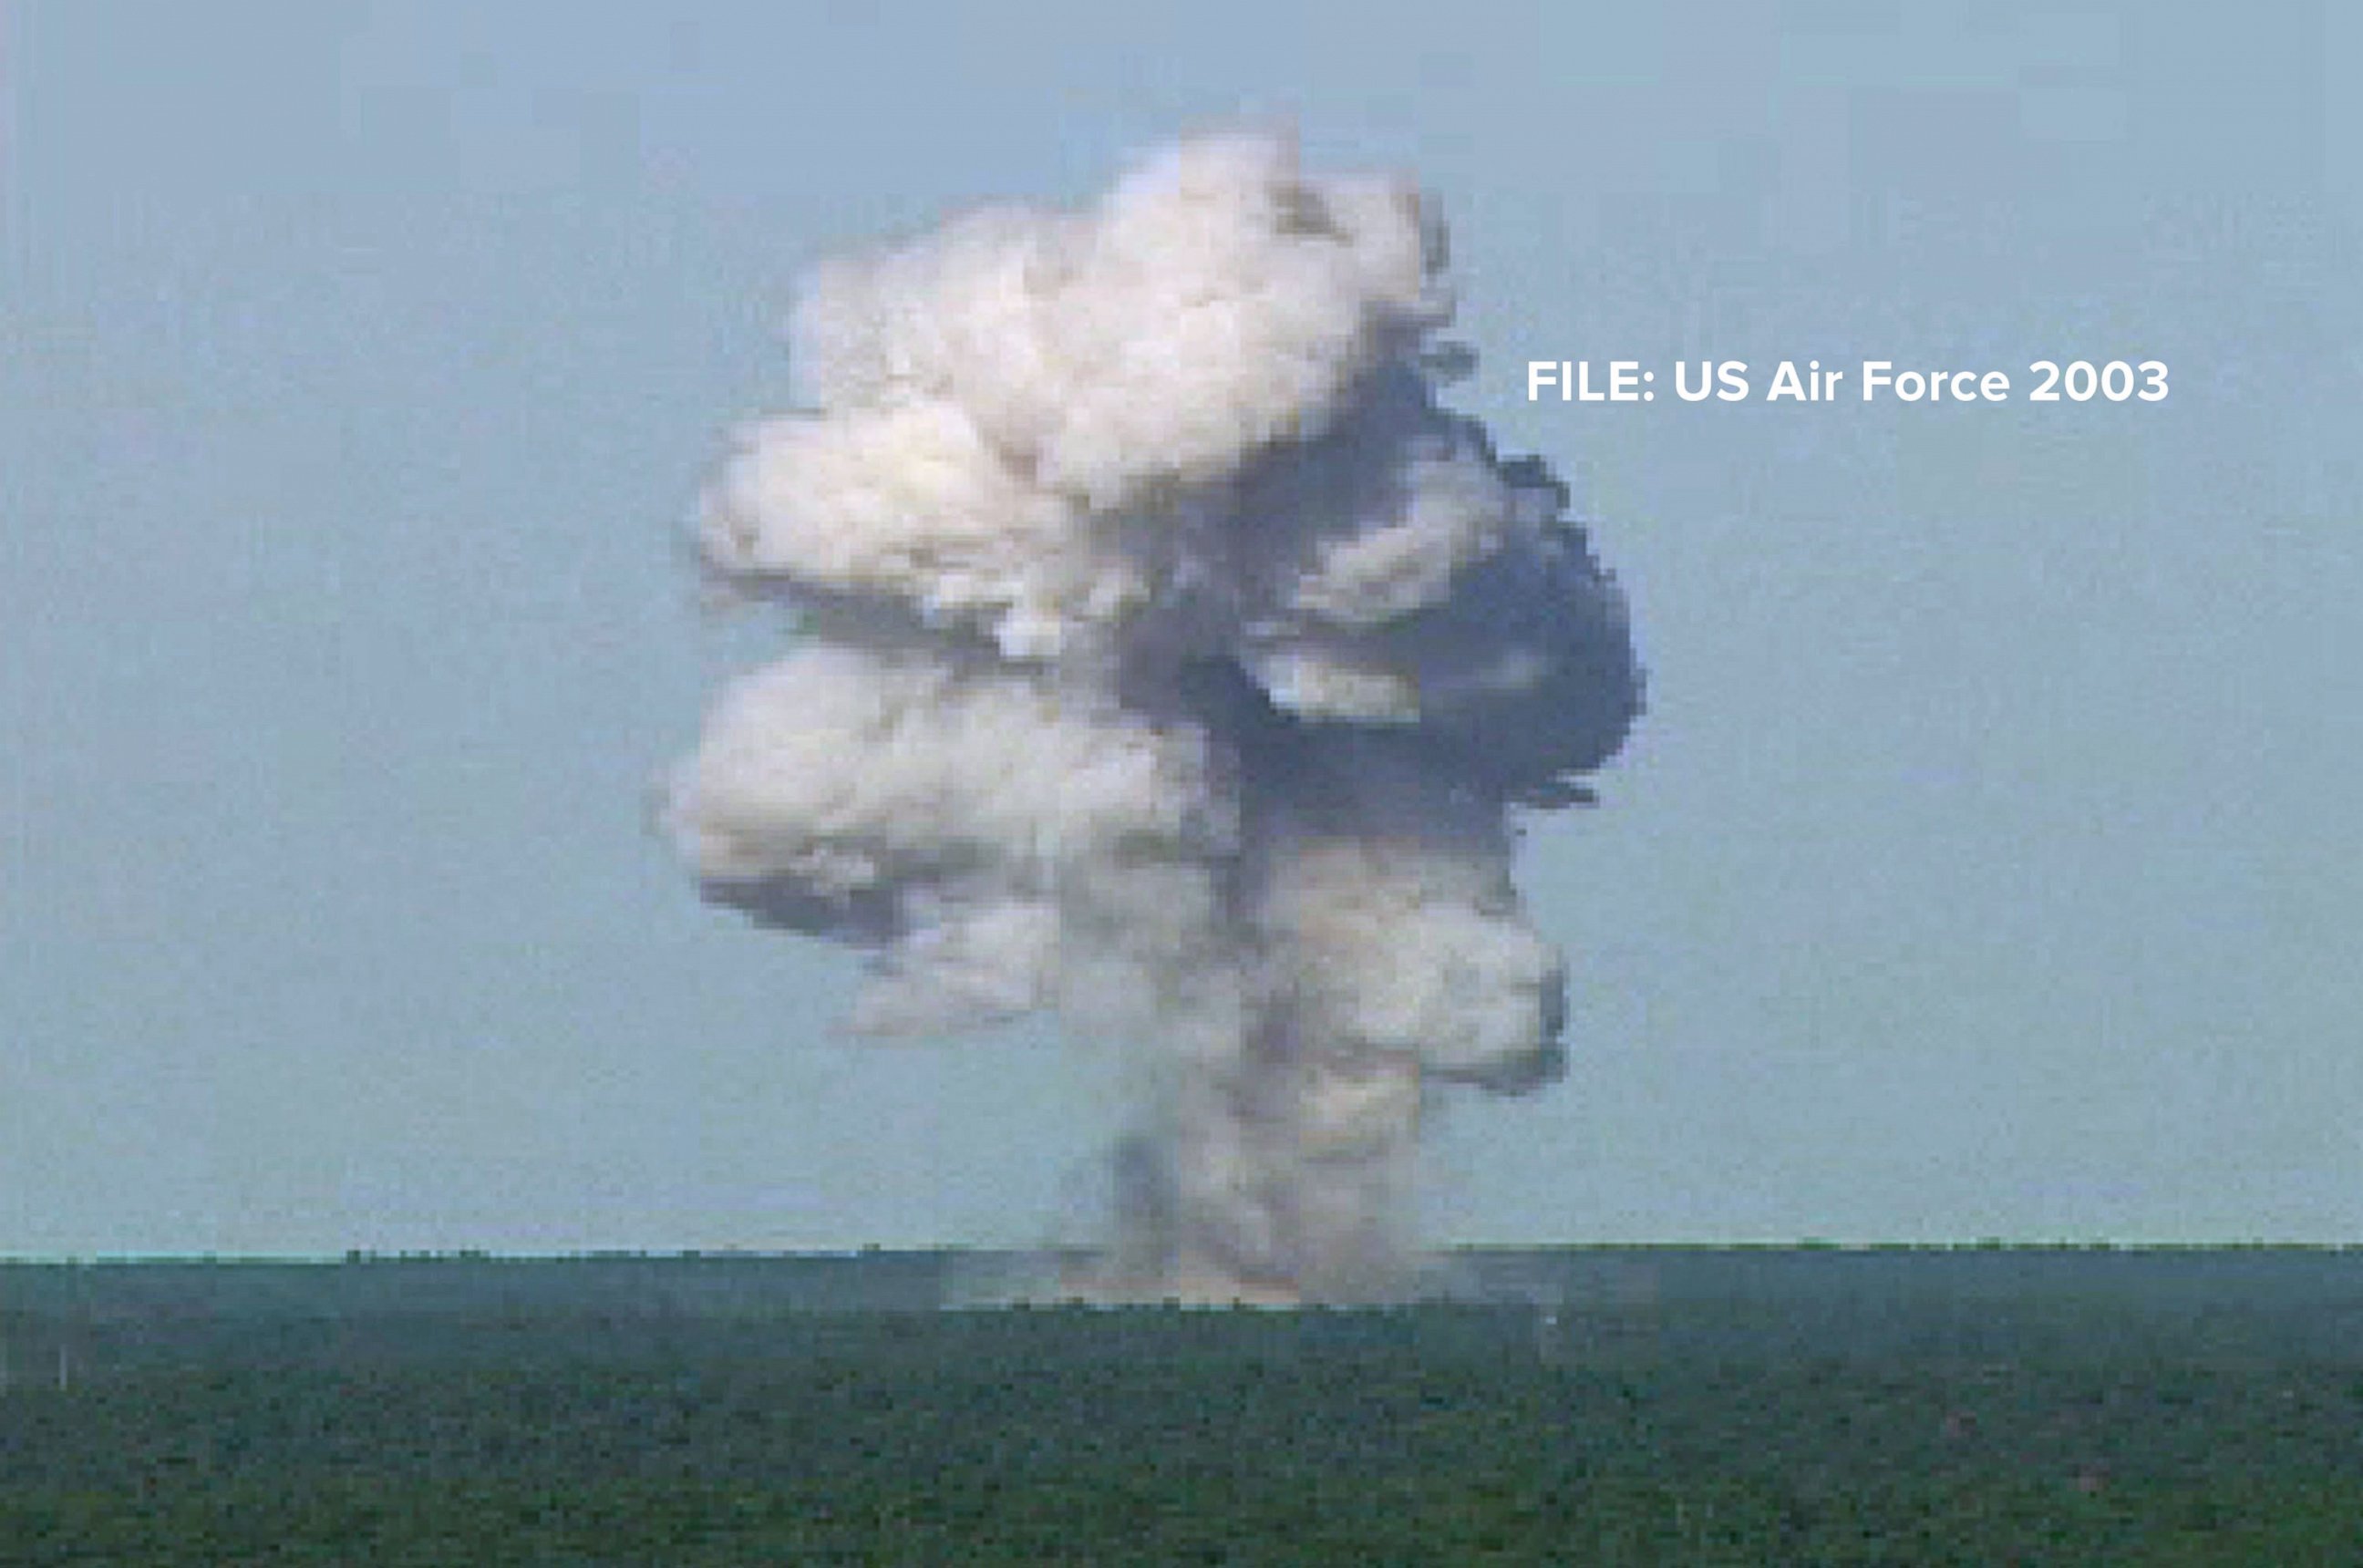 PHOTO: In this U.S. Air Force handout photo, a GBU-43/B bomb, or Massive Ordnance Air Blast (MOAB) bomb, explodes Nov. 21, 2003 at Eglin Air Force Base, Florida. MOAB is a 21,700-pound that was dropped from a plane at 20, 000 feet.